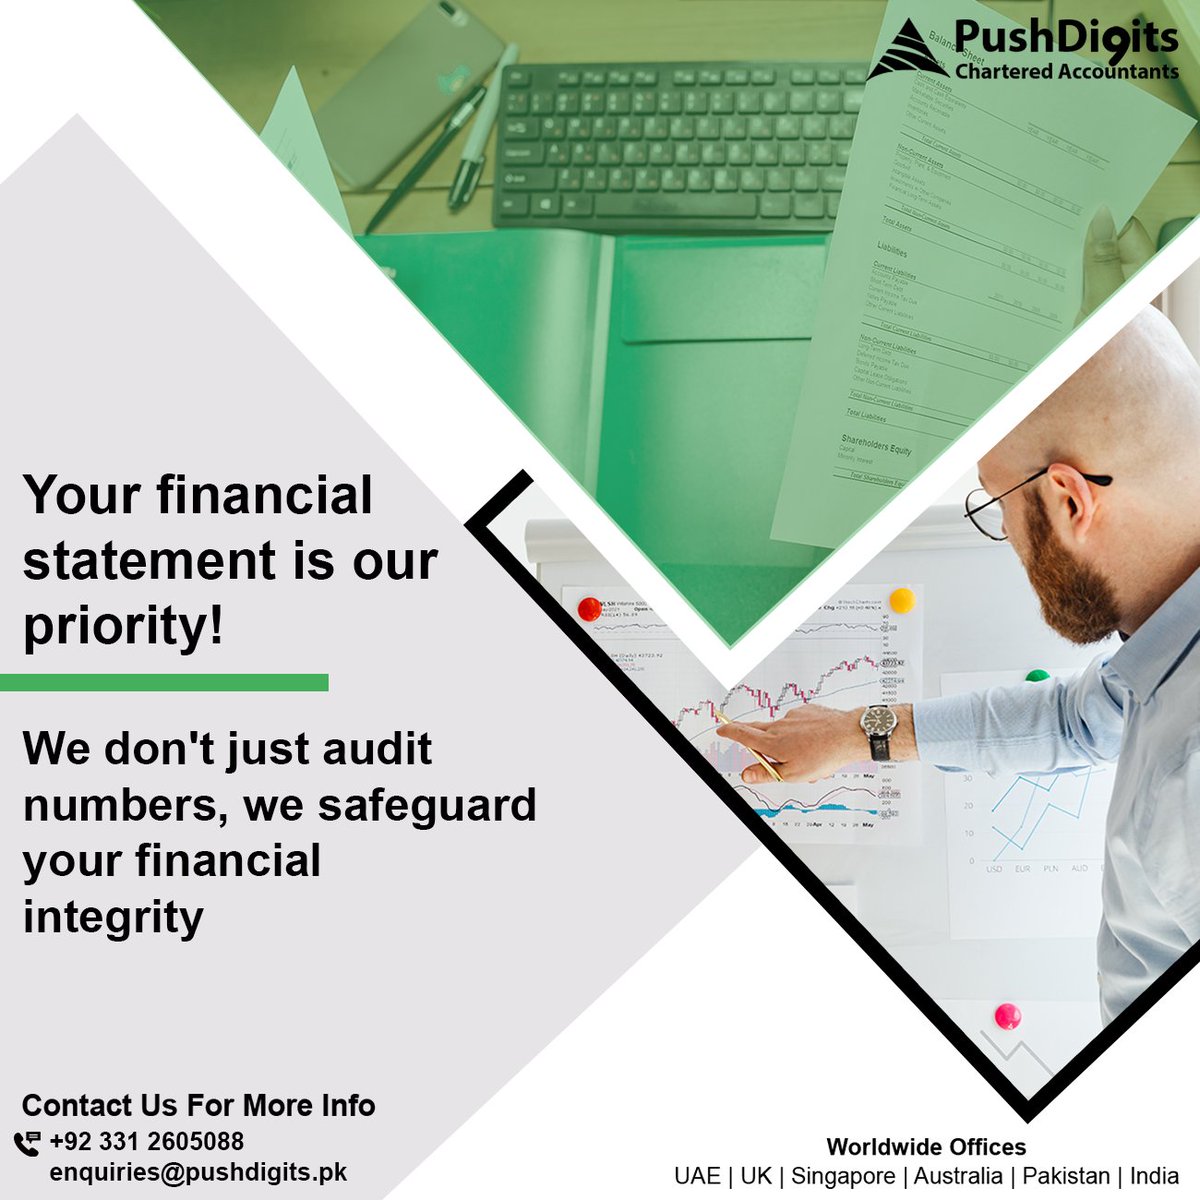 We go beyond audits, we protect your financial legacy. Join hands with us for a secure tomorrow!

pushdigits.pk

#Pushdigits #AuditFirm #FinancialIntegrity #AuditExperts #NumbersMatter #FinancialSecurity #TrustworthyAuditors #ProtectingYourAssets #AuditAssurance